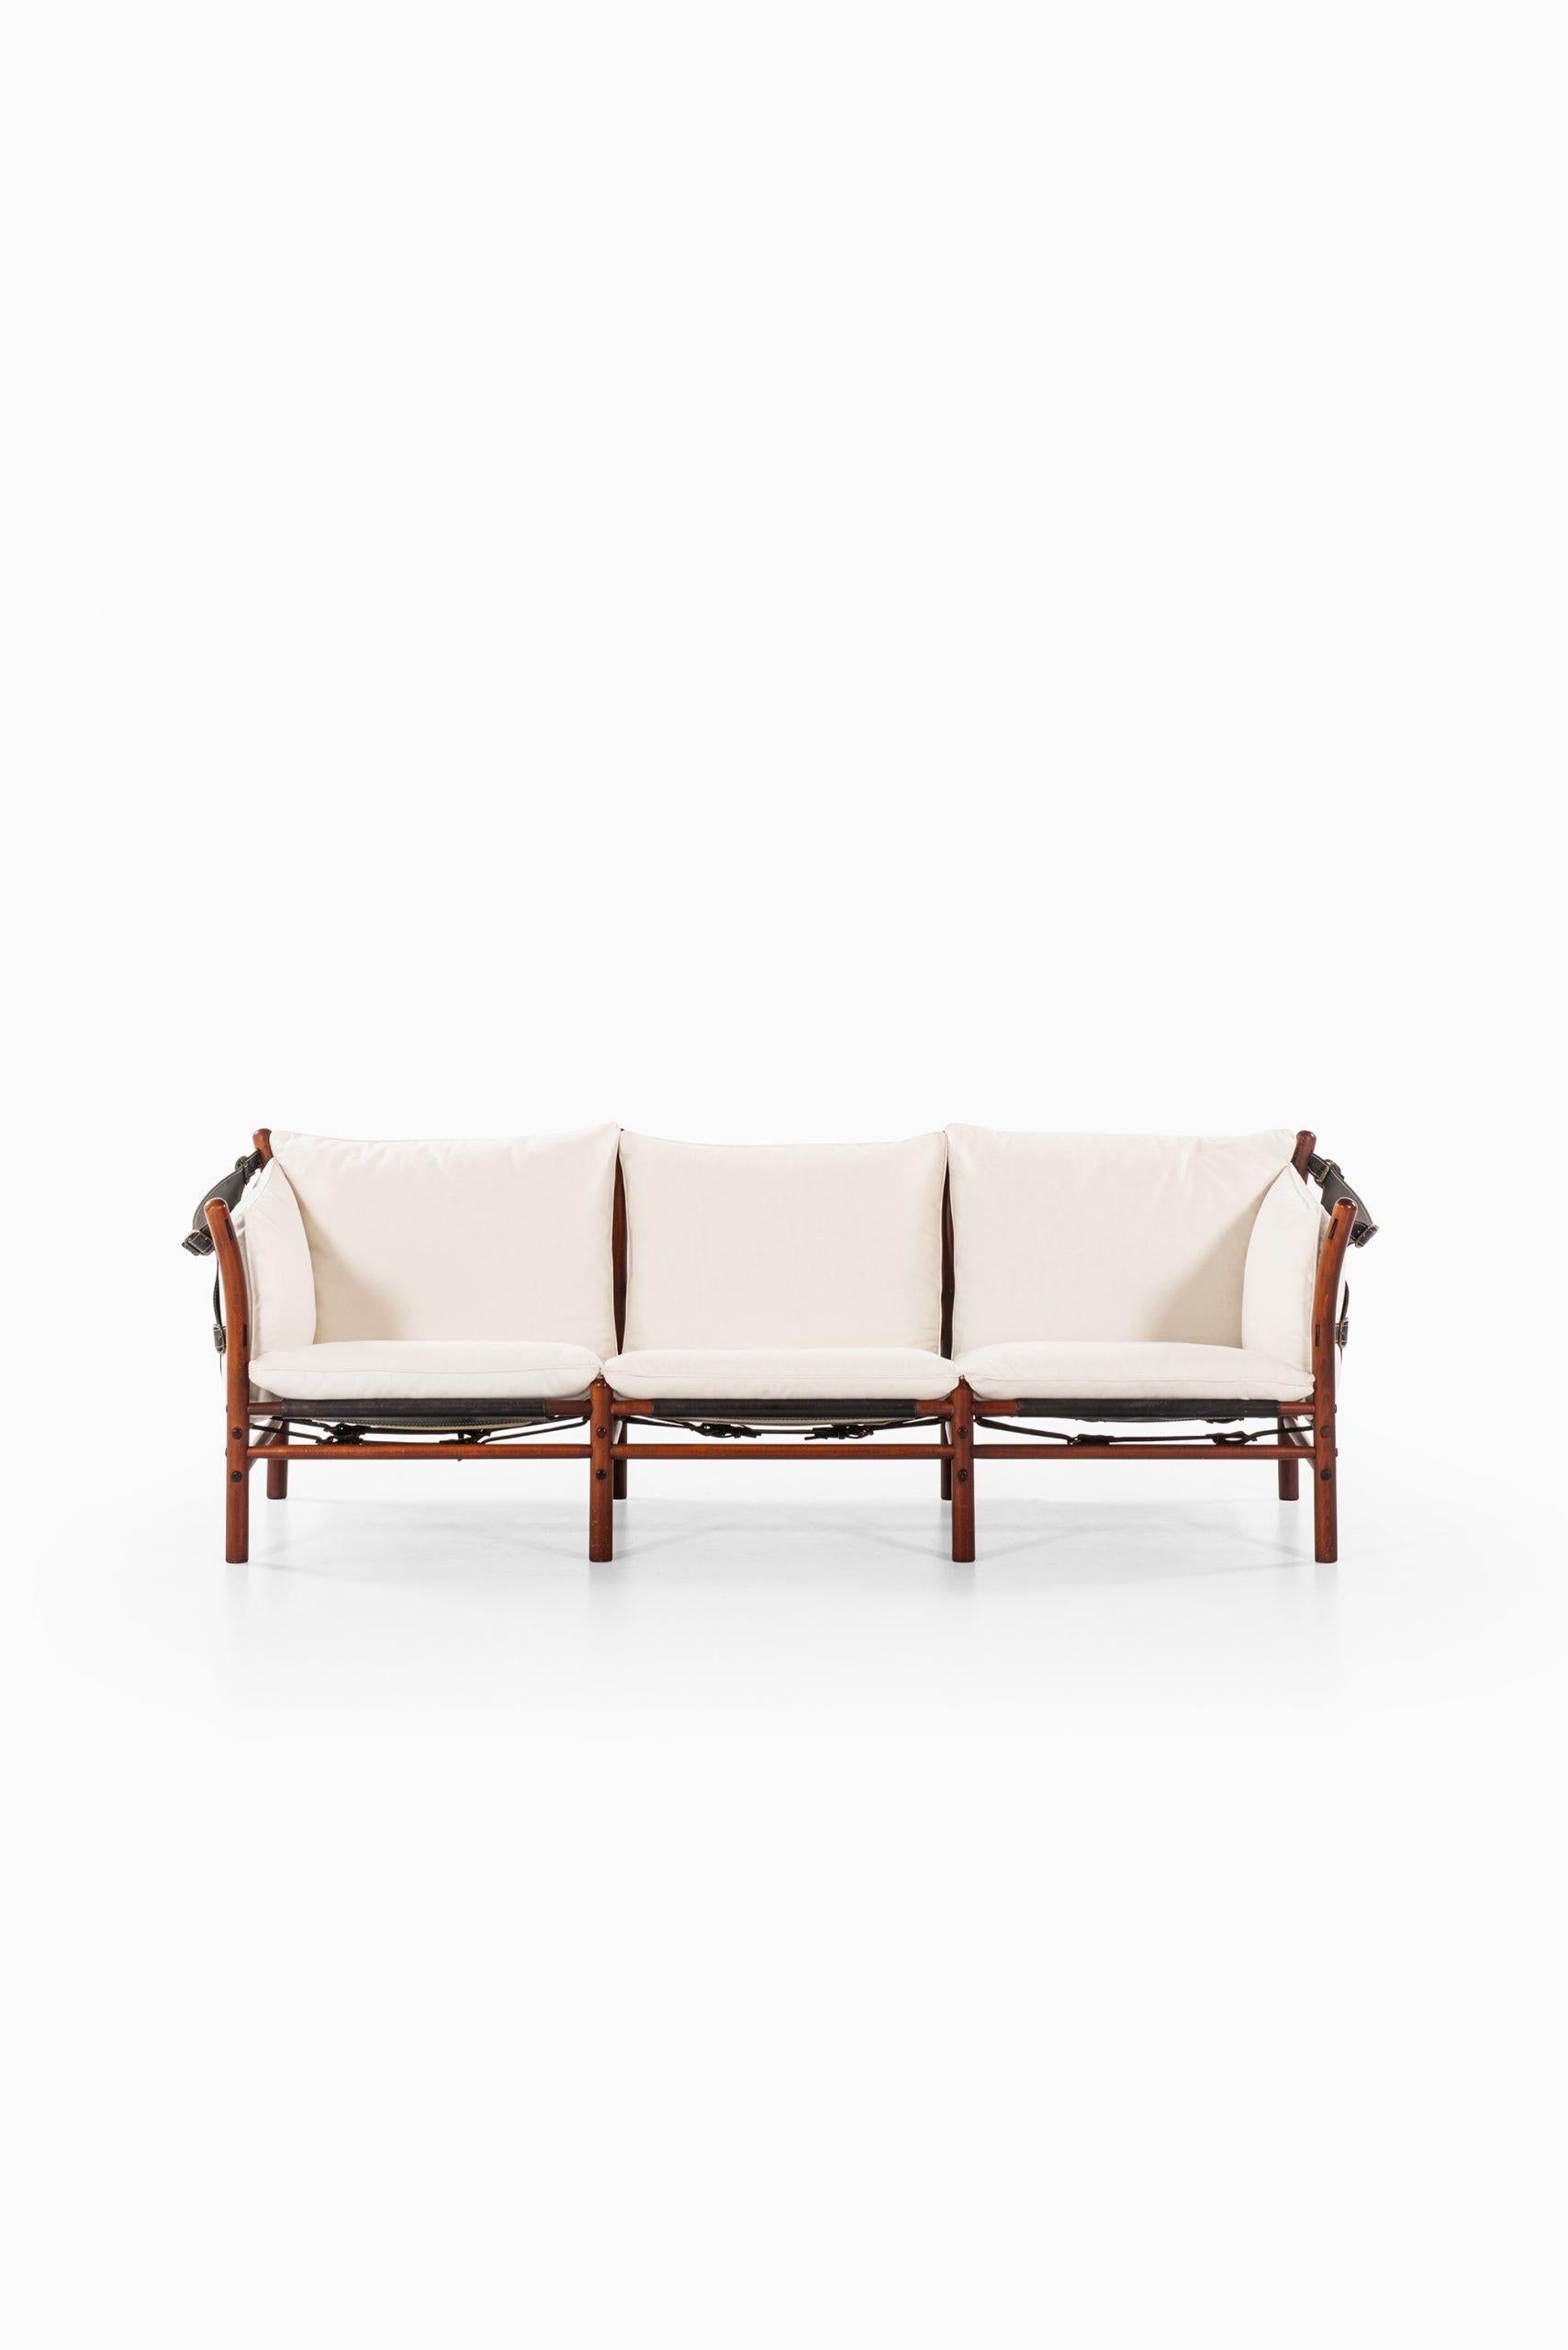 3-seat sofa model Ilona designed by Arne Norell. Produced by Arne Norell AB in Aneby, Sweden.